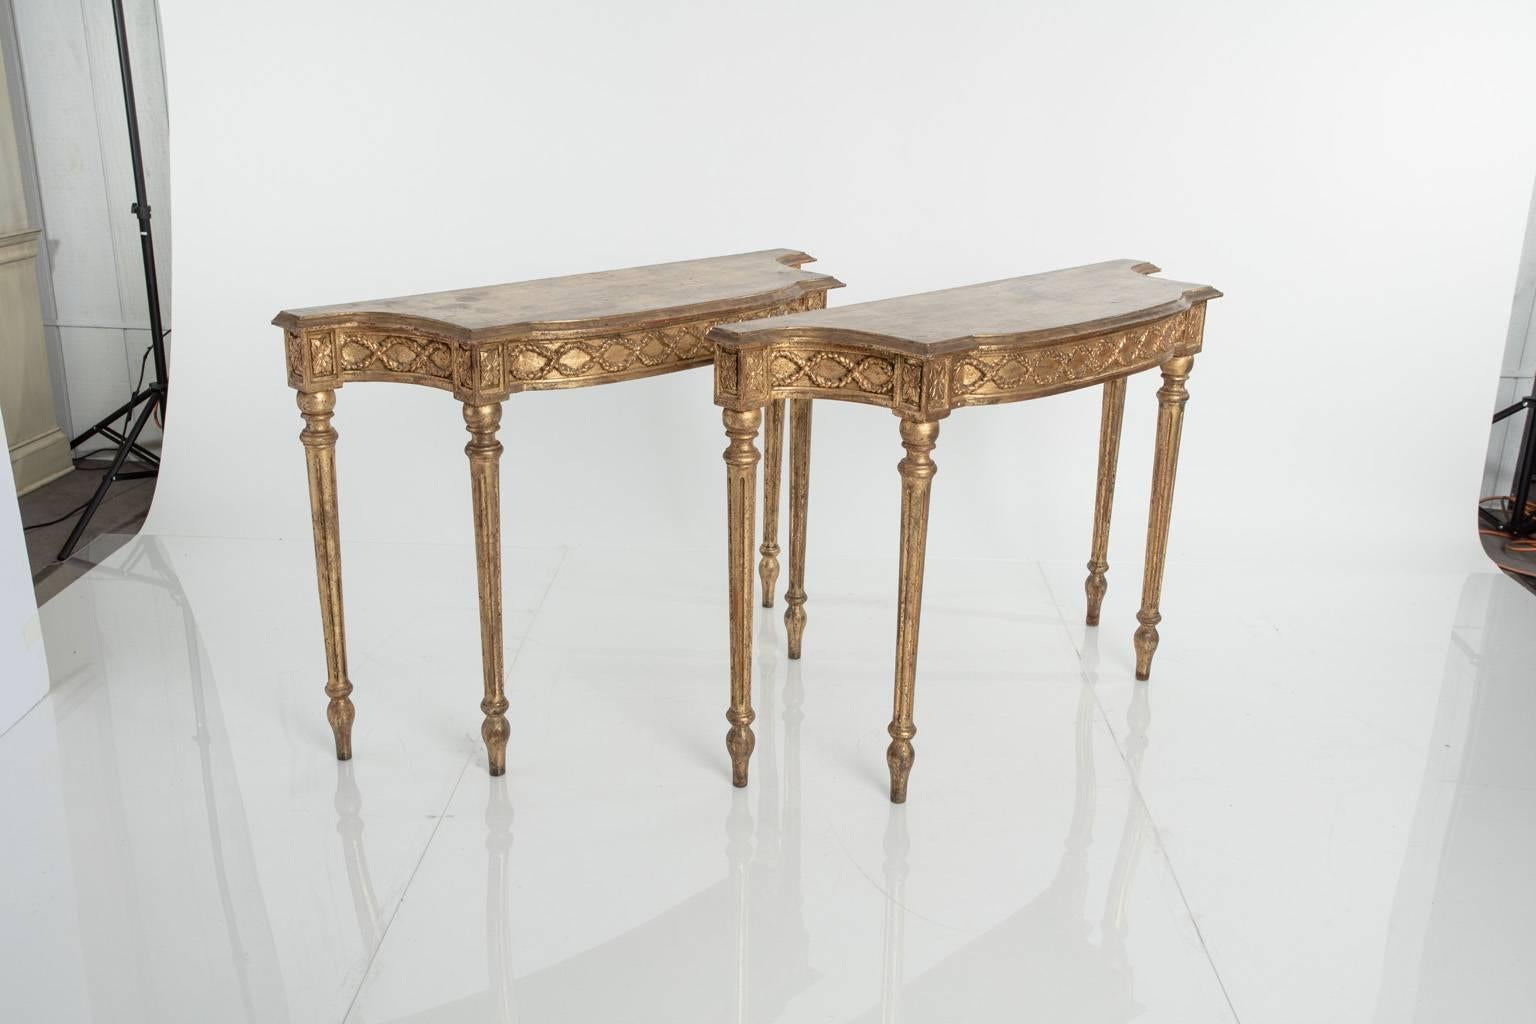 Pair of Louis XVI style gilt console tables with tapered feet and ornamented apron.